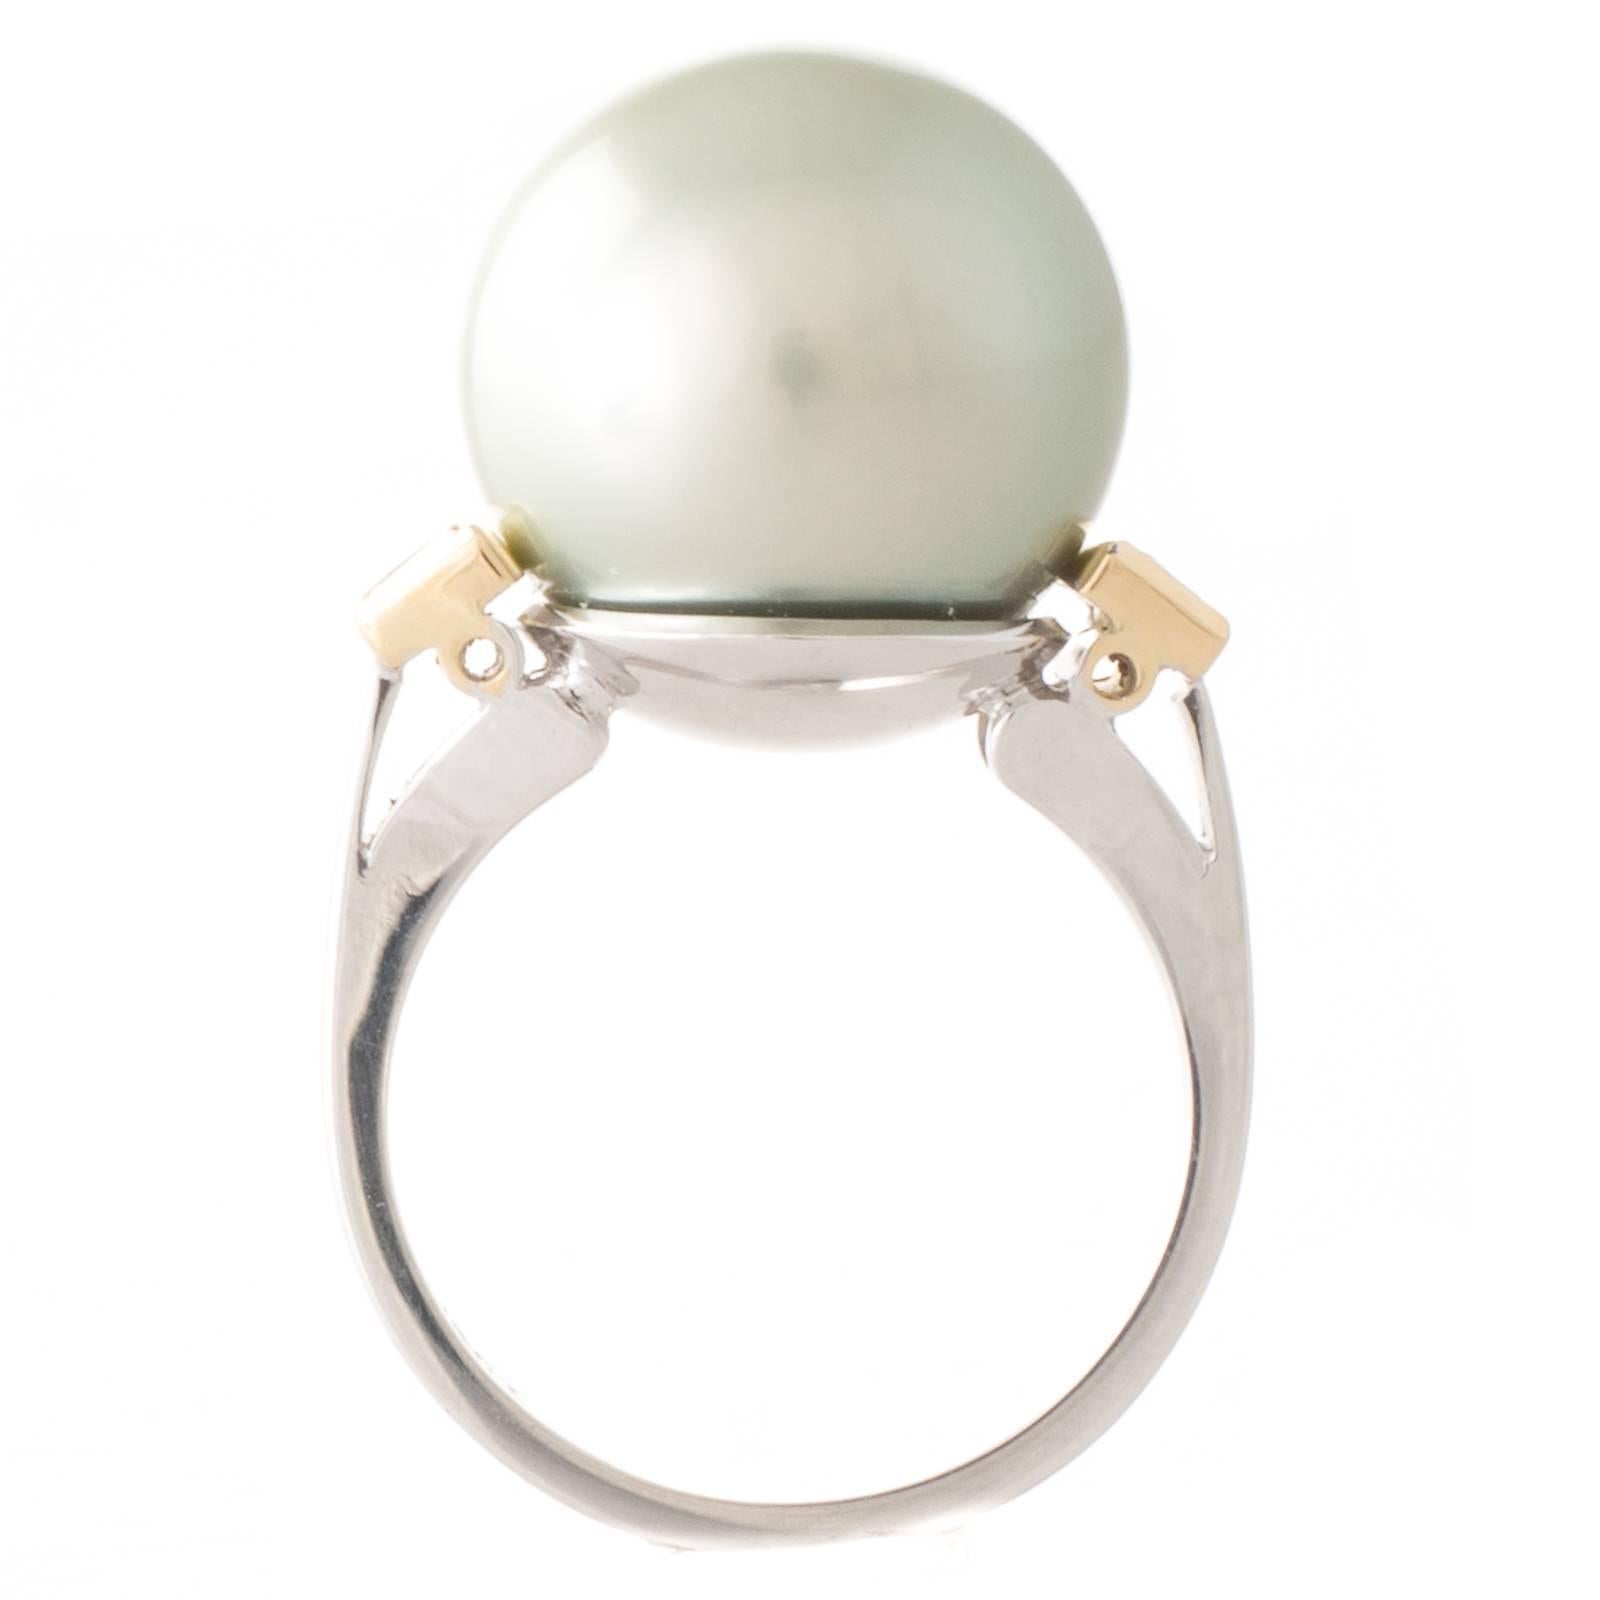 A Tahitian pearl ring featuring a 14.9mm round dark silver/grey green hue (pistachio coloured) Tahitian South Sea pearl with high lustre and very few natural surface marks set into a ring of 18ct white gold with a pair of trapezoid shape fancy